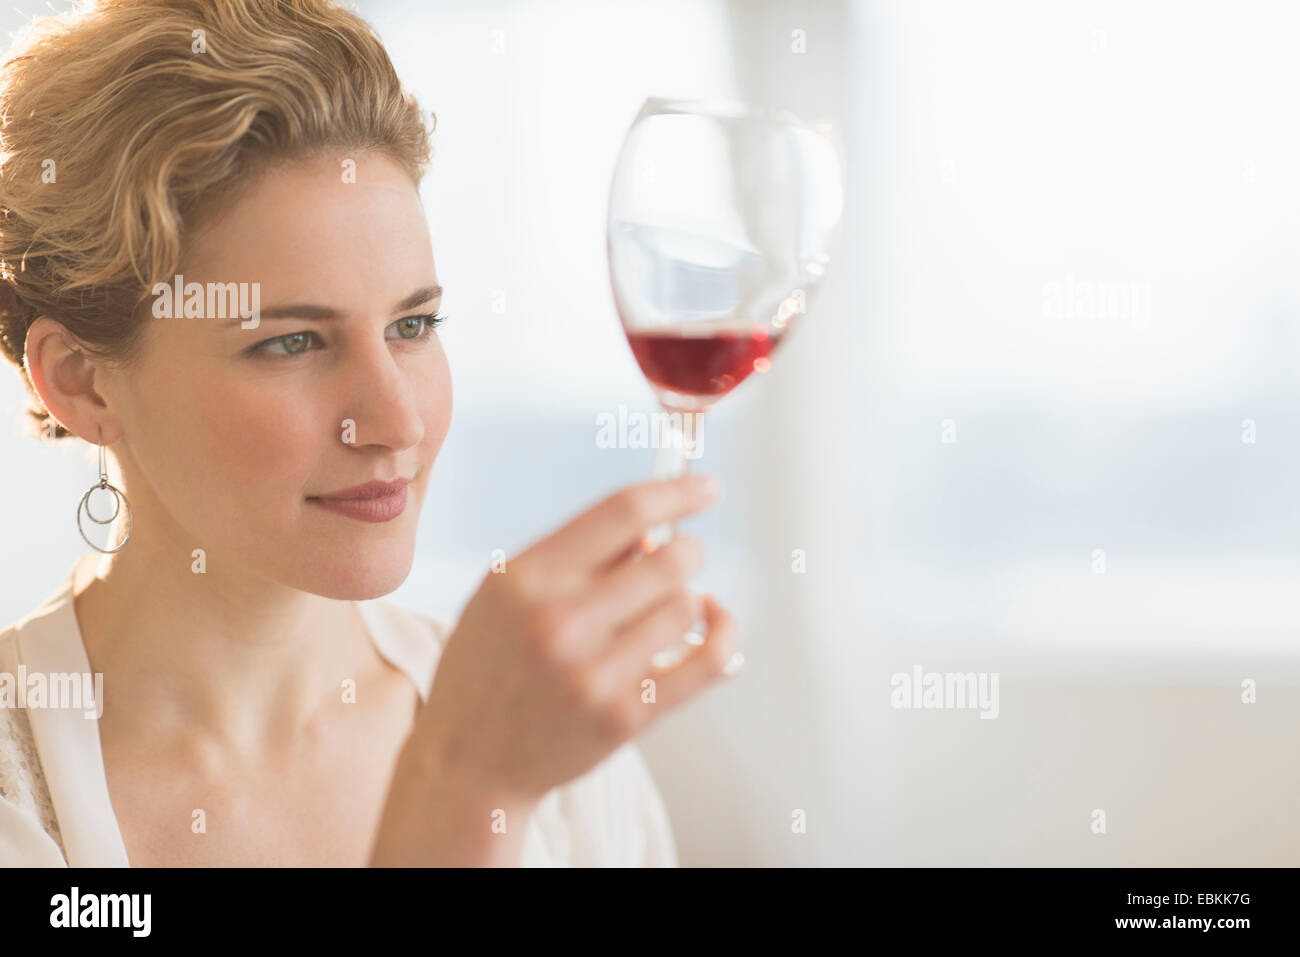 Young woman examining red wine Stock Photo